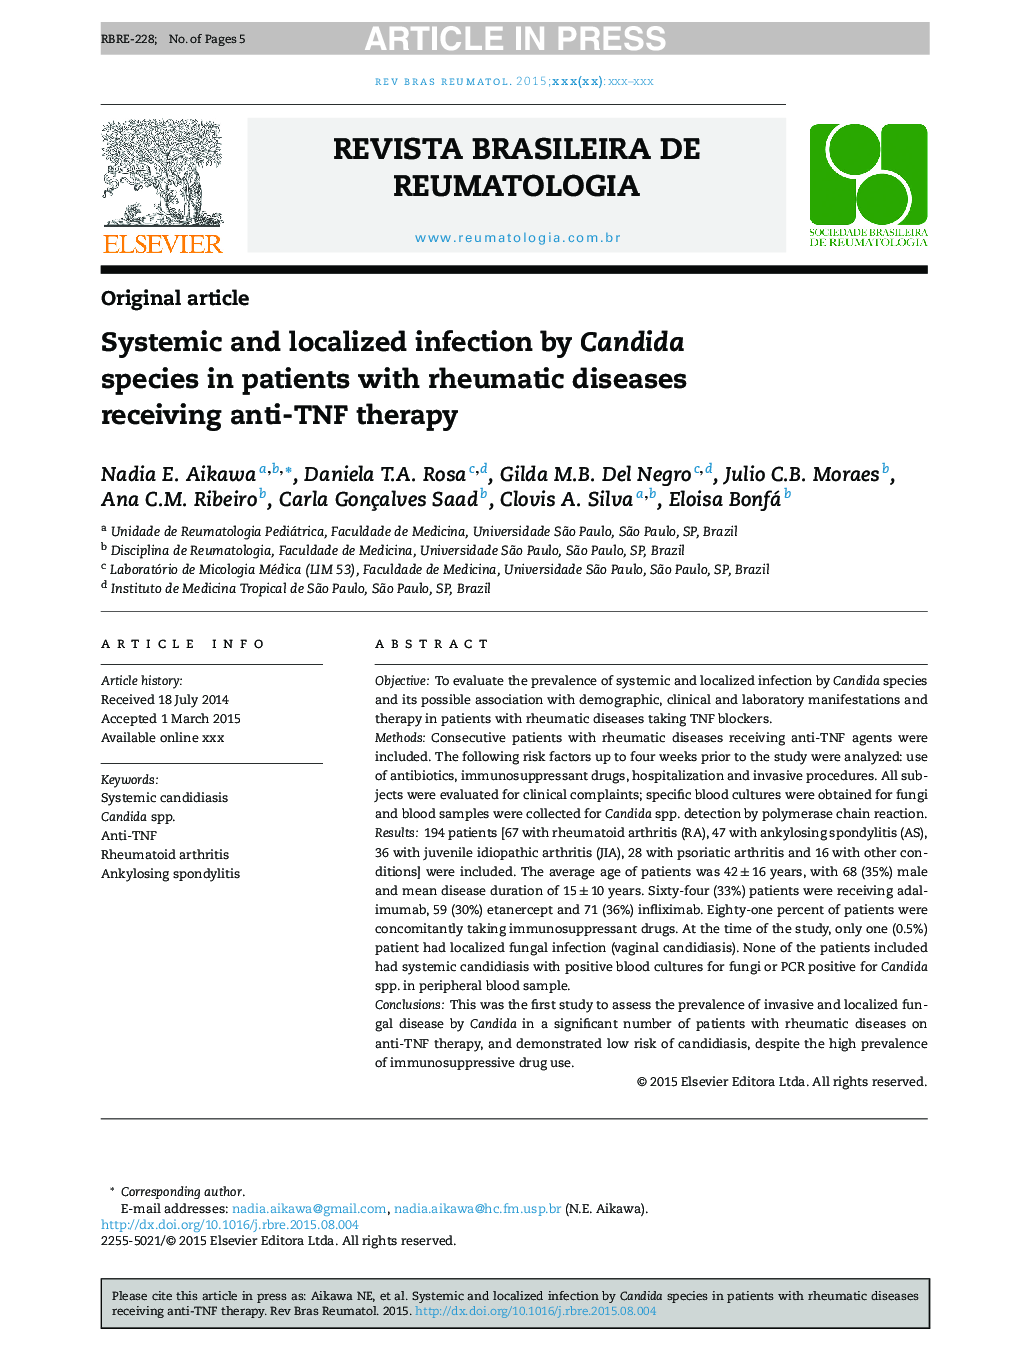 Systemic and localized infection by Candida species in patients with rheumatic diseases receiving anti-TNF therapy